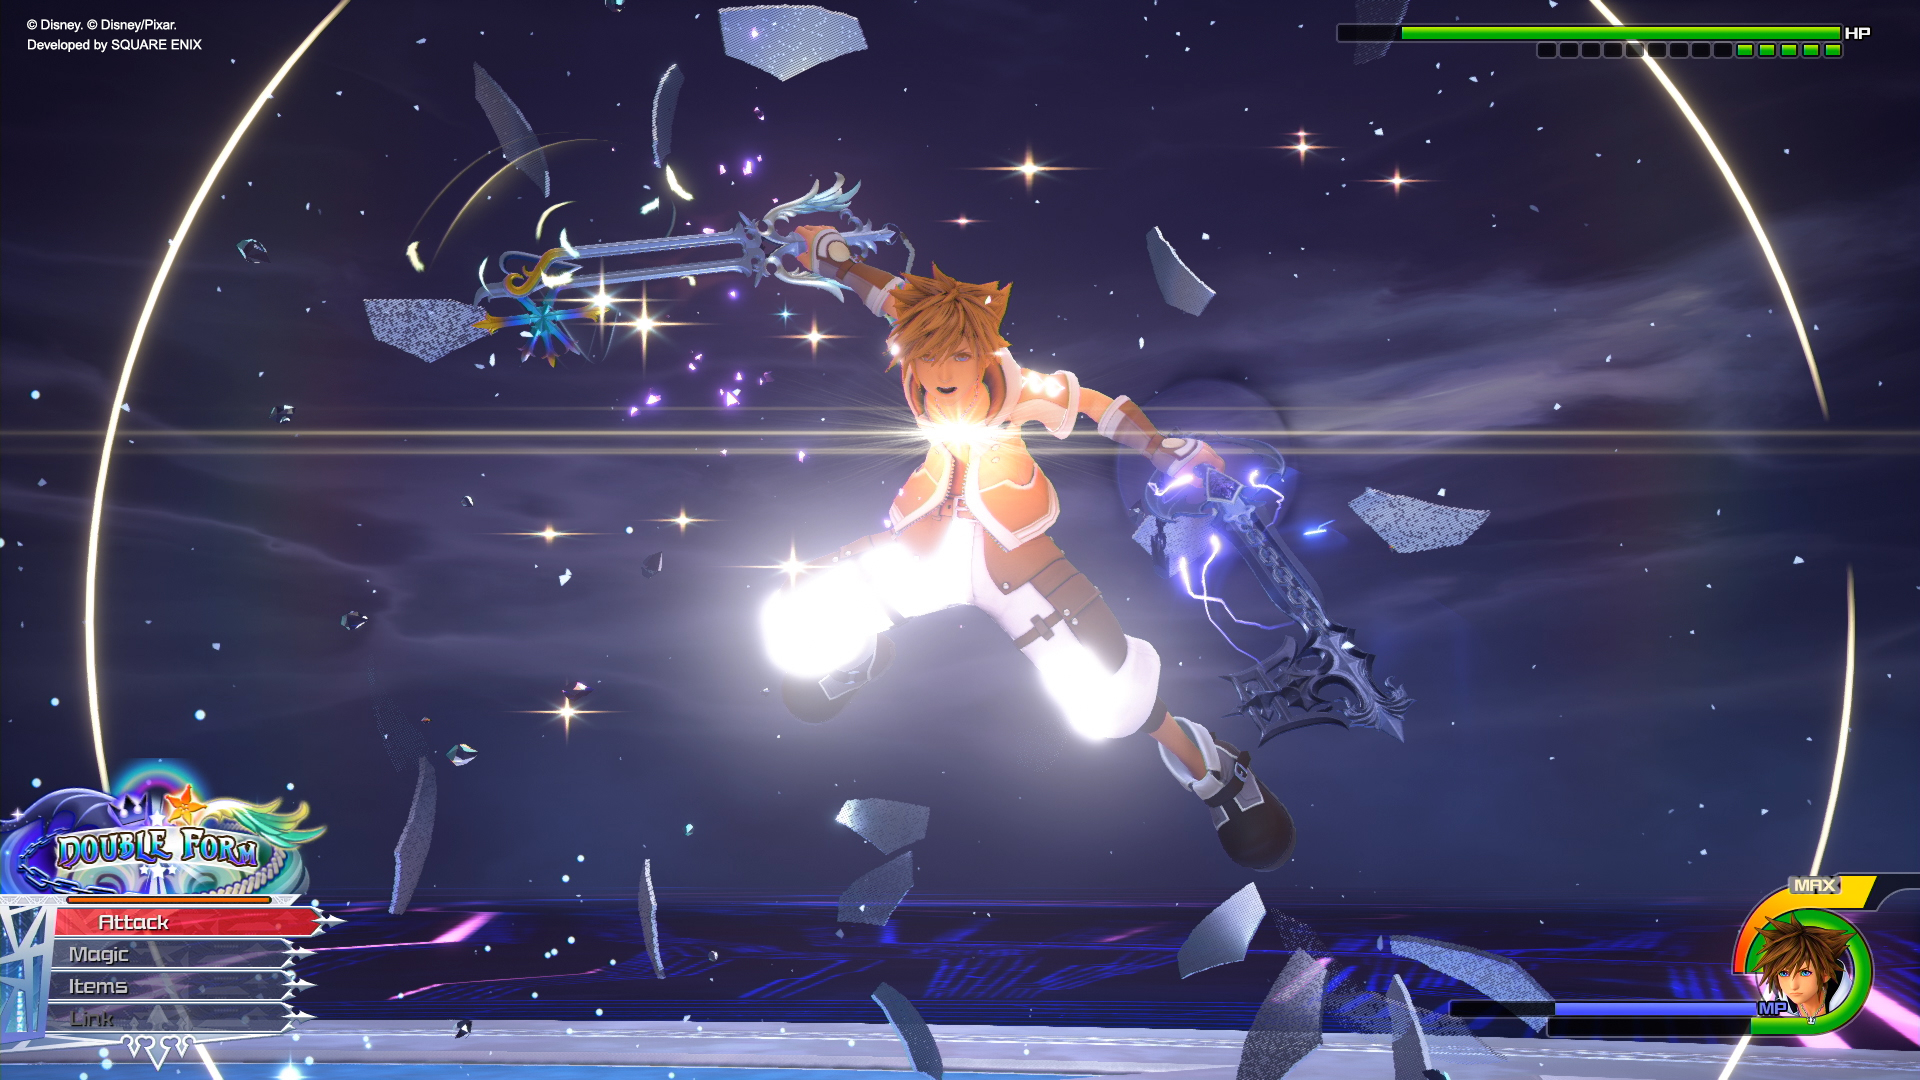 Kingdom Hearts 3 Remind Guide How To Get Oathkeeper And Oblivion Keyblades And Defeat All Bosses